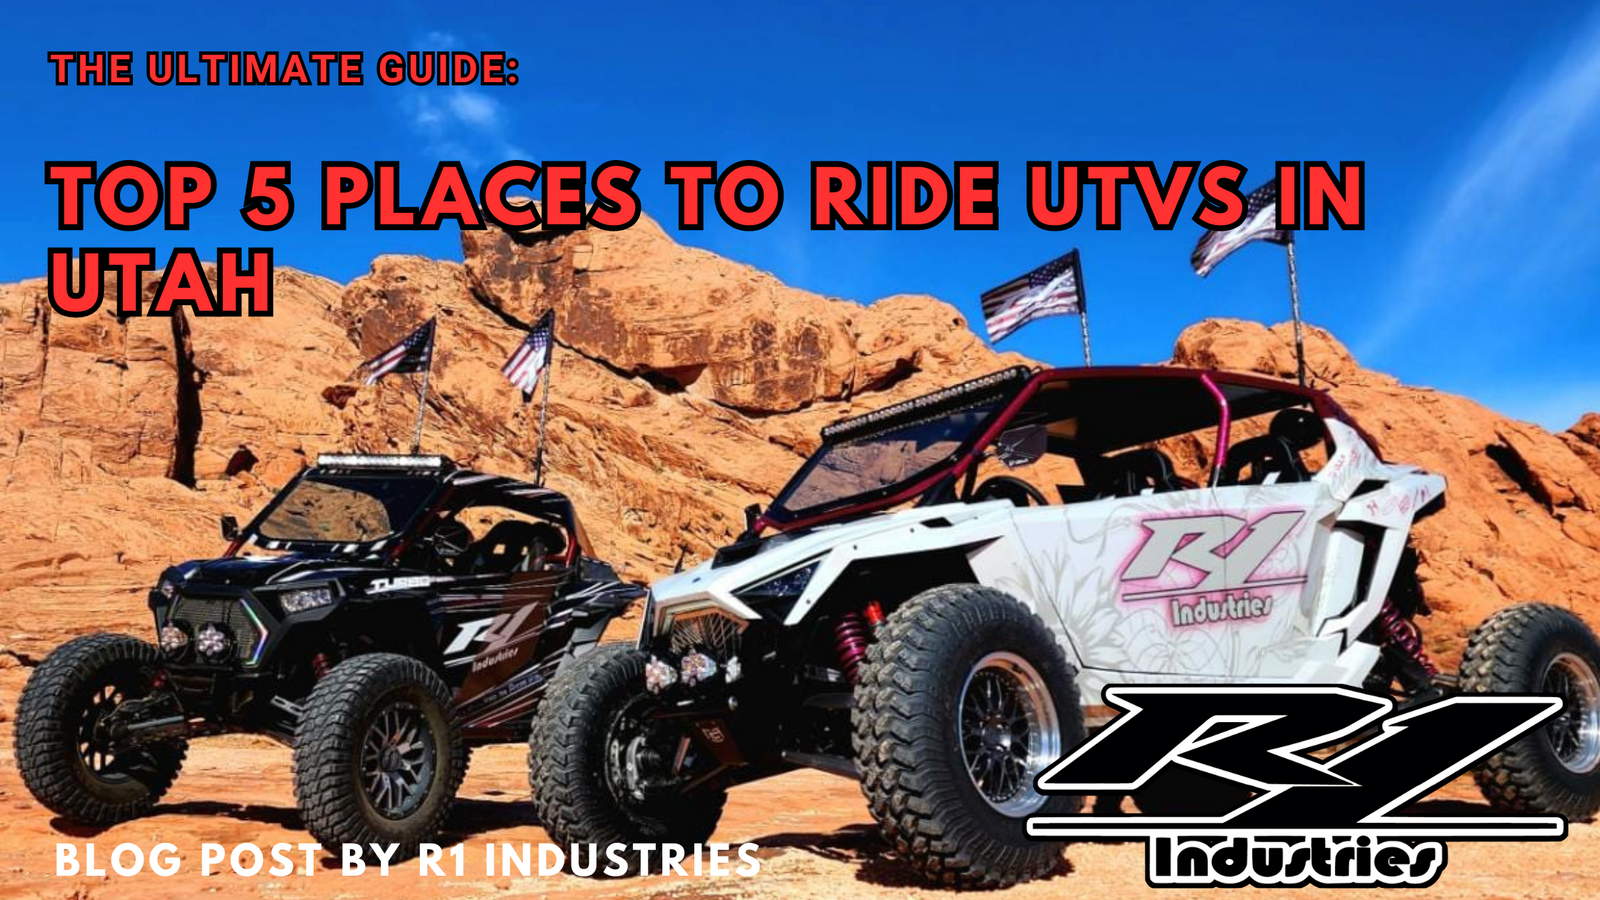 The Ultimate Guide: R1's opinion on the Top 5 Places to Ride UTVs in Utah